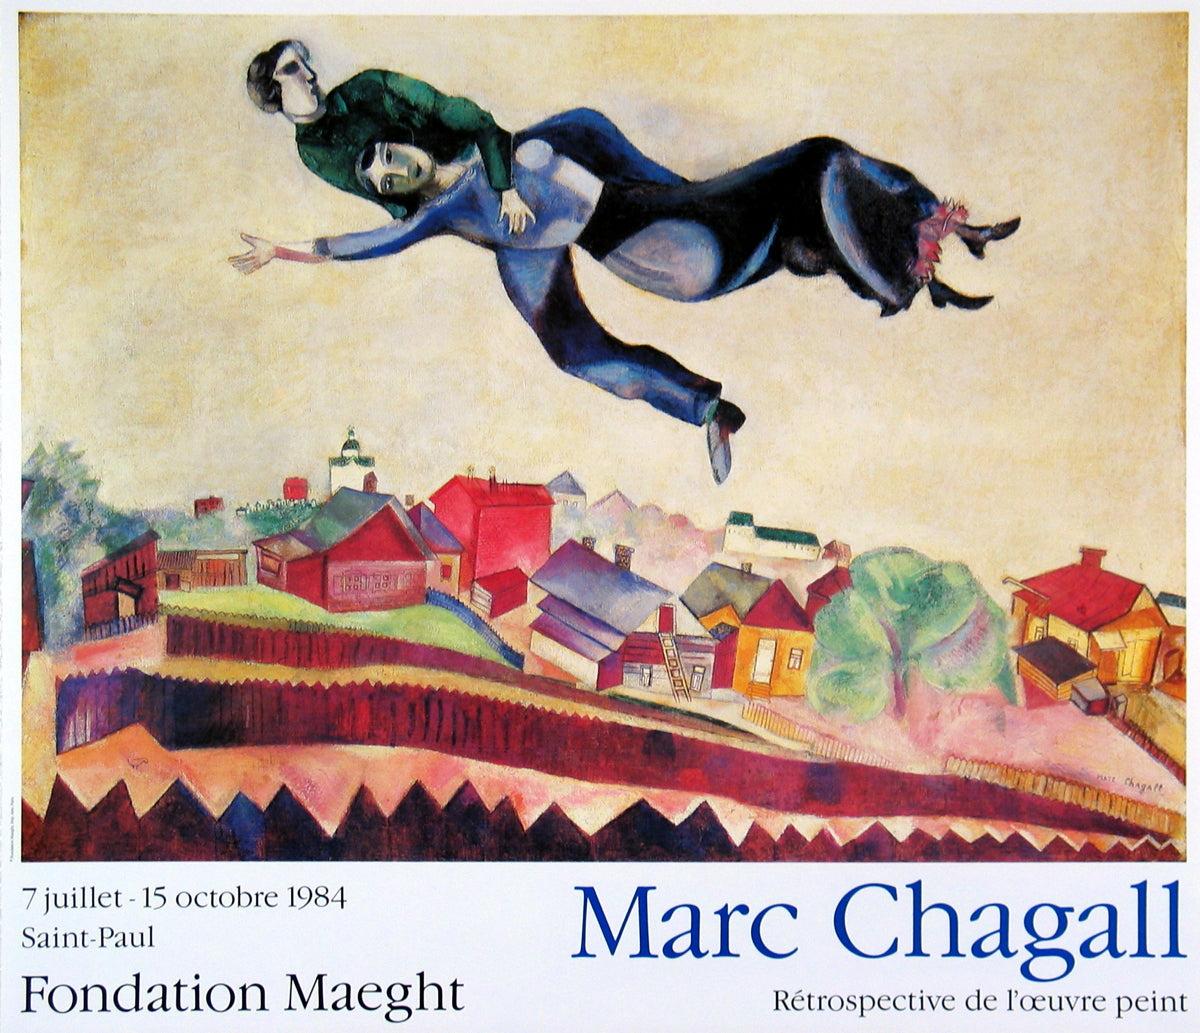 Sku: GMF66
Artist: Marc Chagall
Title: Au Dessus De La Ville
Year: 2012
Signed: No
Medium: Offset Lithograph
Paper Size: 23.25 x 26.75 inches ( 59.055 x 67.945 cm )
Image Size: 19 x 26 inches ( 48.26 x 66.04 cm )
Edition Size: Open
Framed: